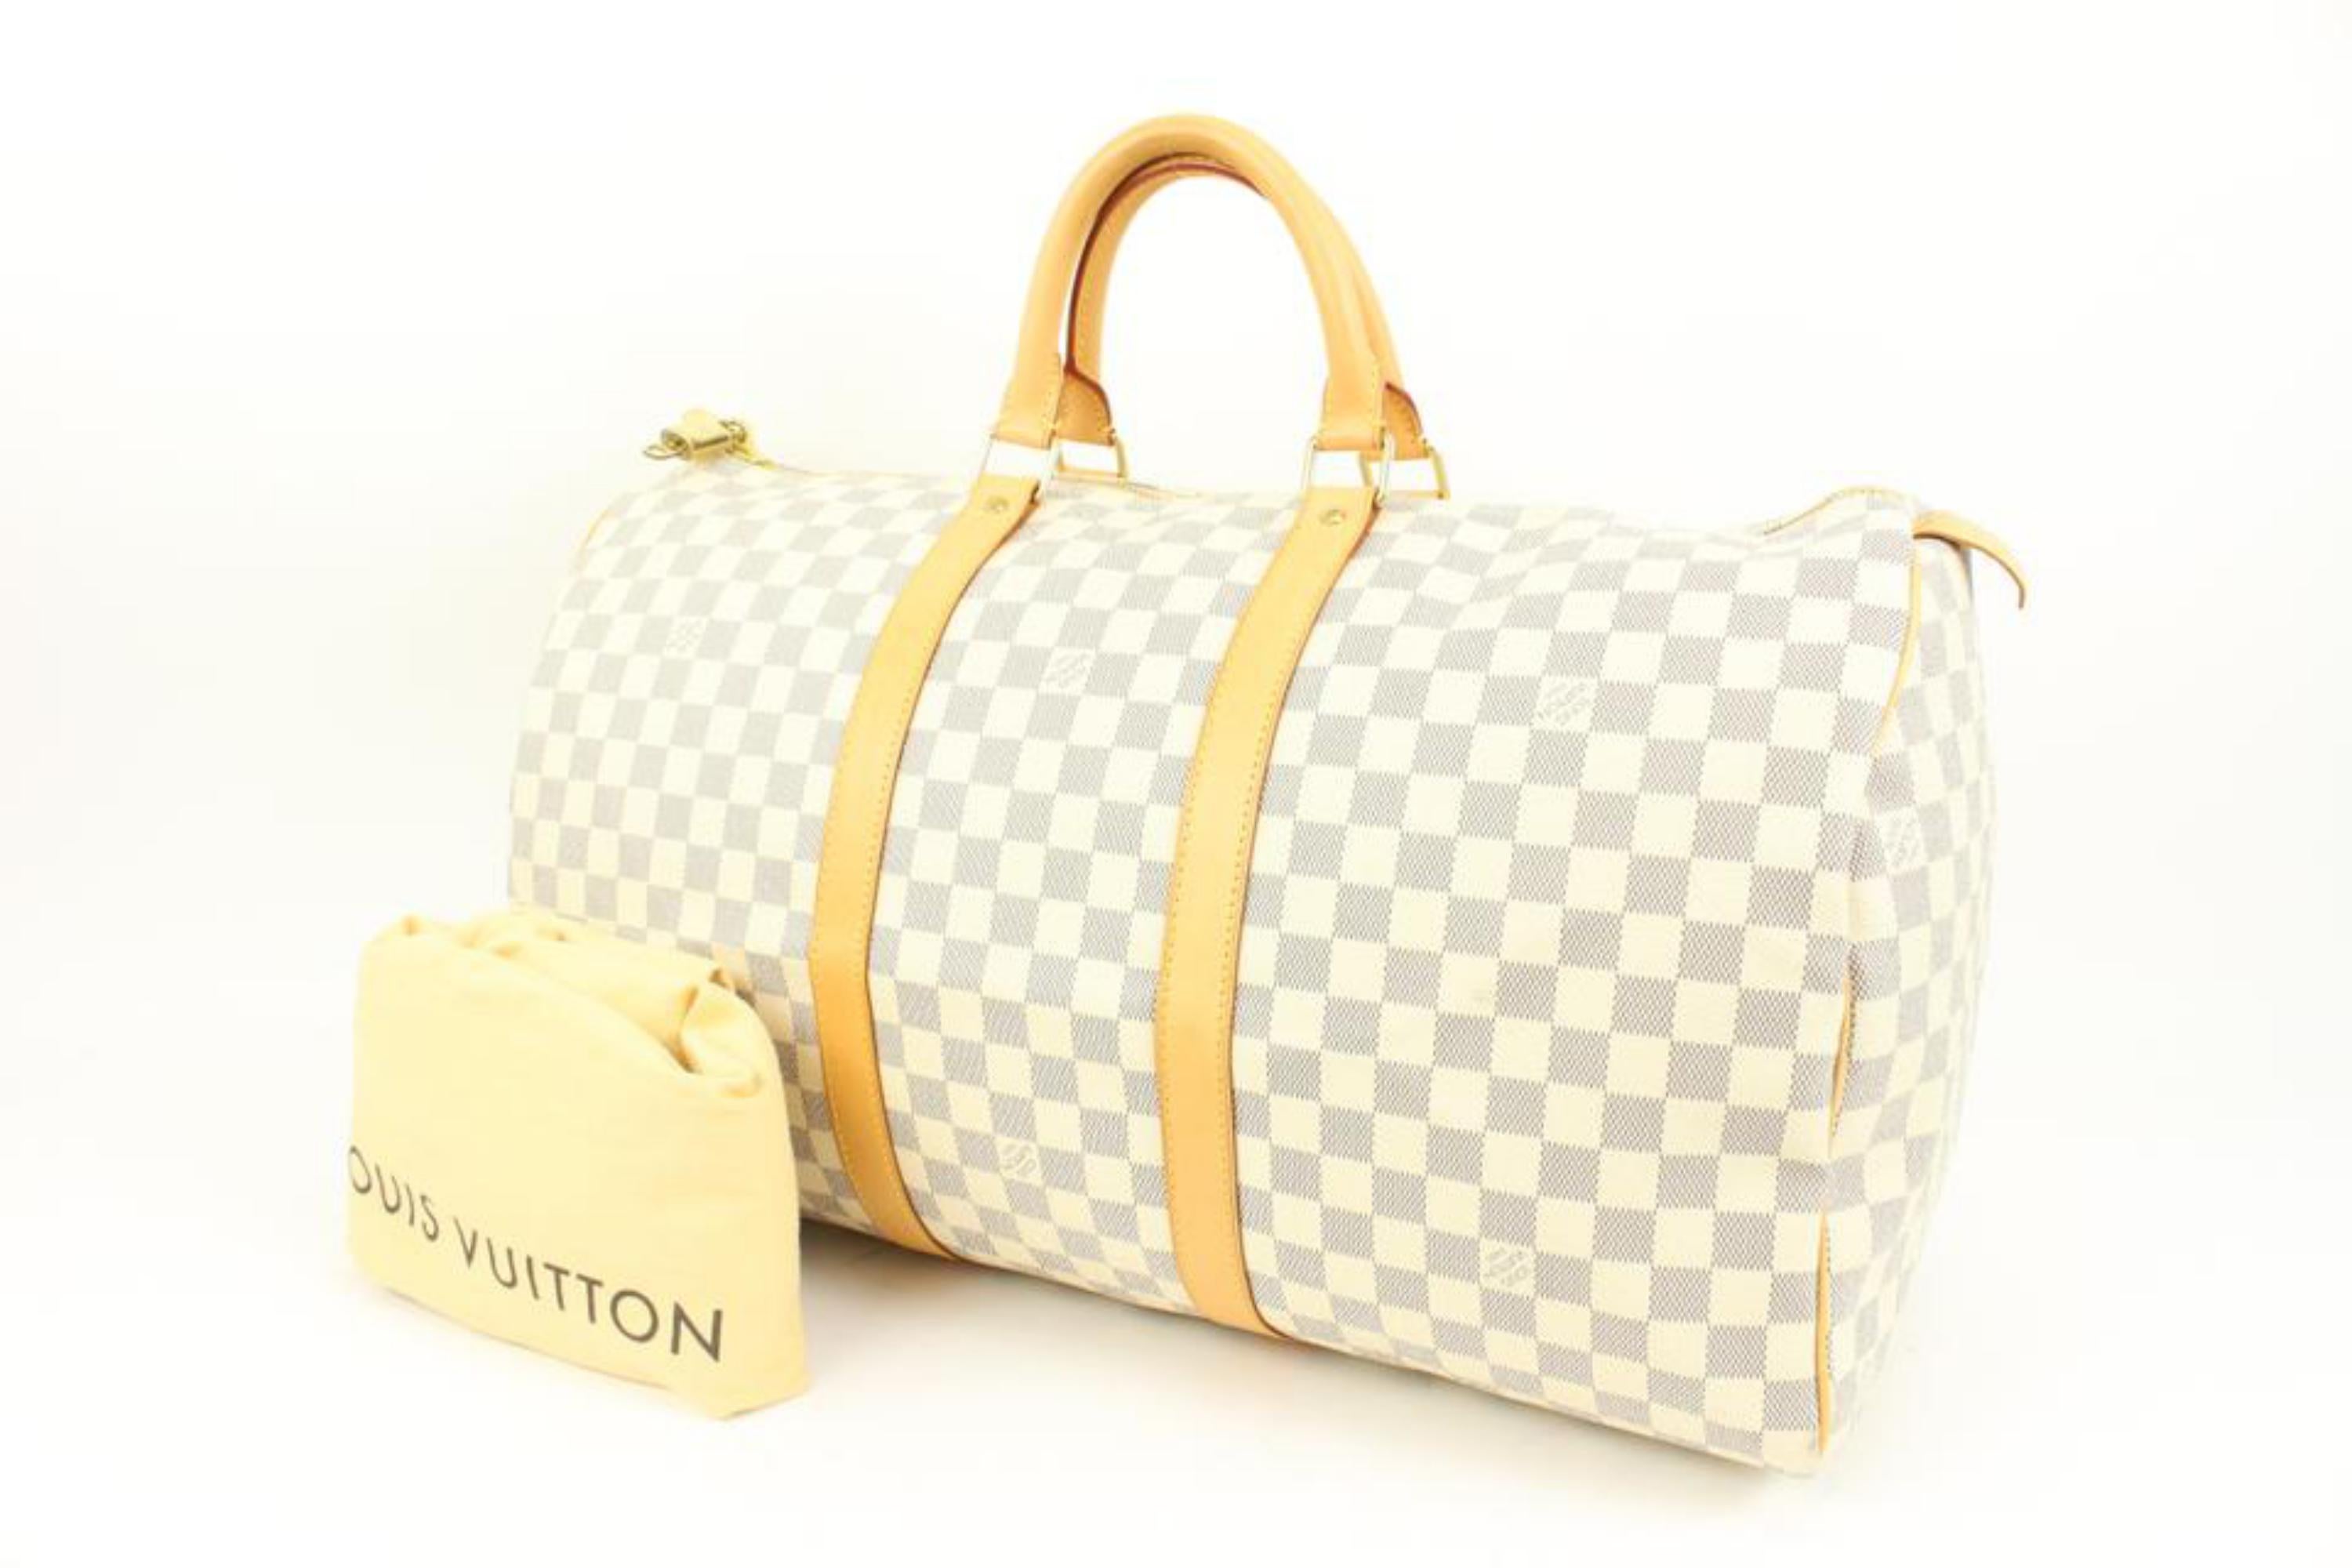 Louis Vuitton Keepall 55 Travel Bag - VINTAGE for Sale in Boca